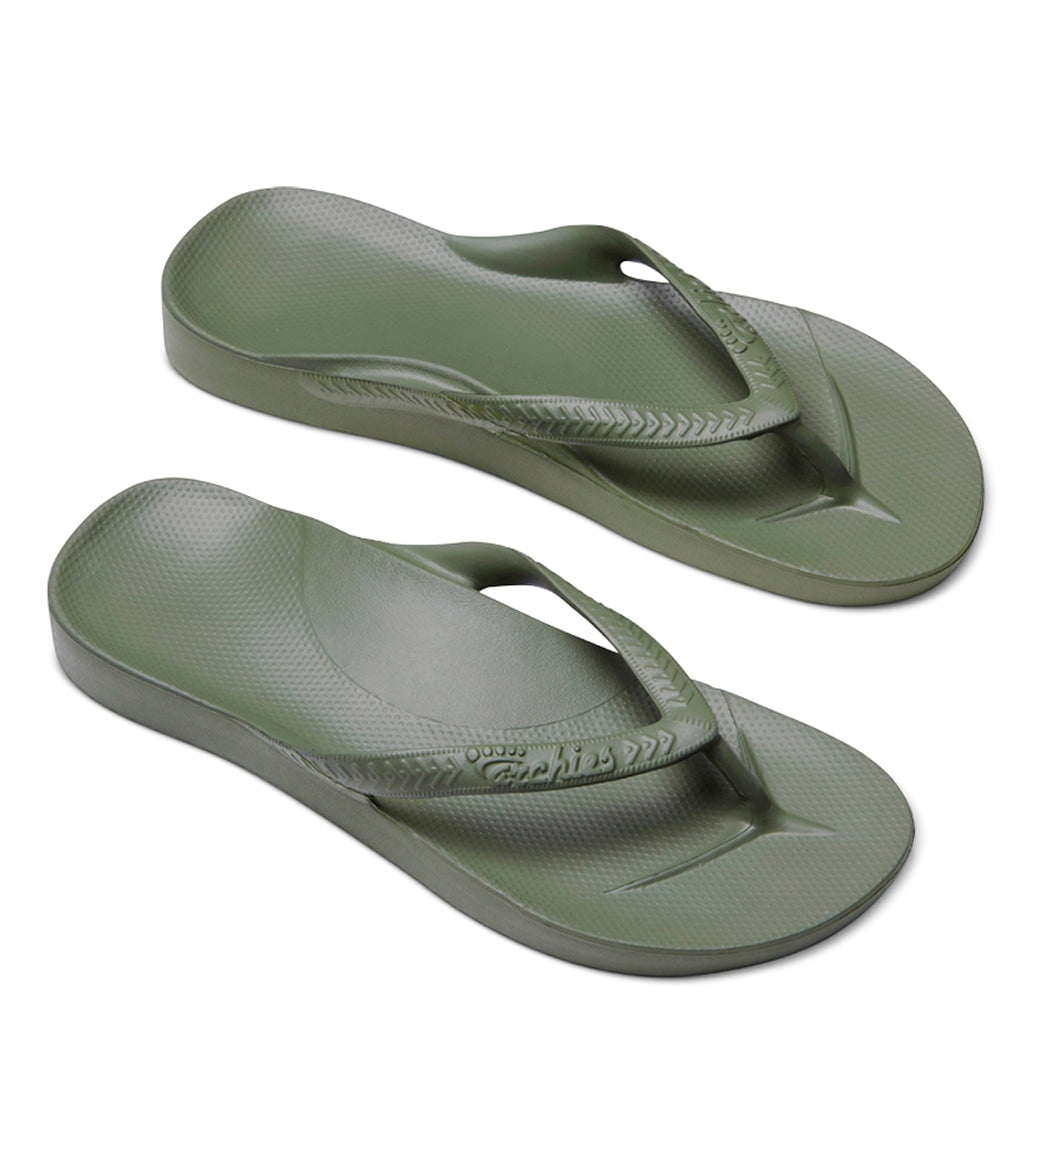 ARCHIES Footwear - Flip Flop Sandals Offering Great Arch Support And  Comfort - Taupe